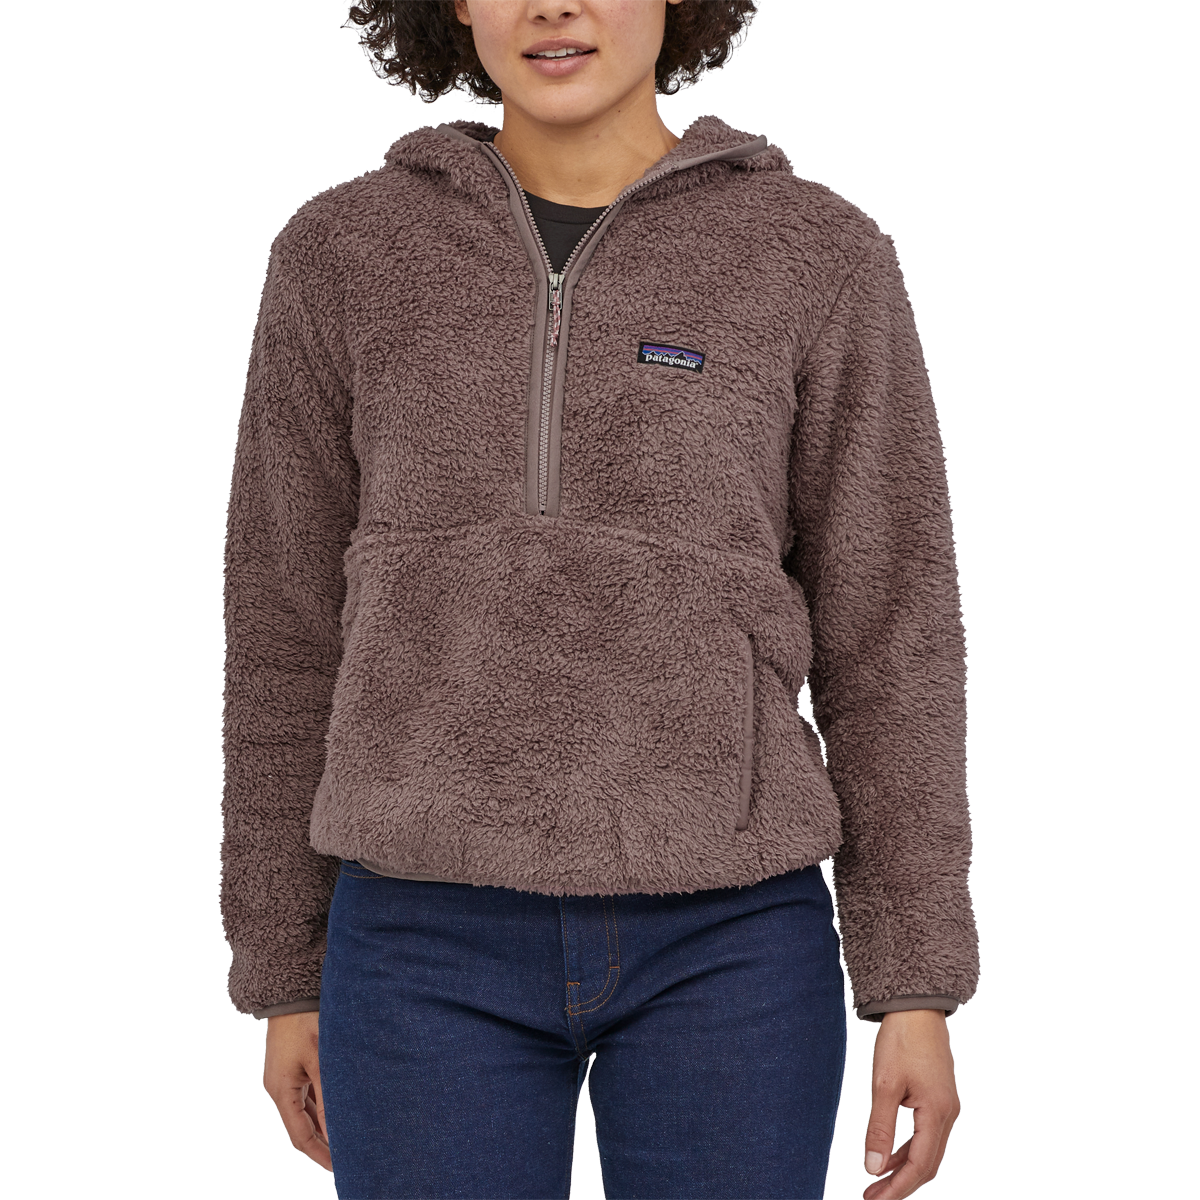 Women's Los Gatos Hooded Pullover alternate view